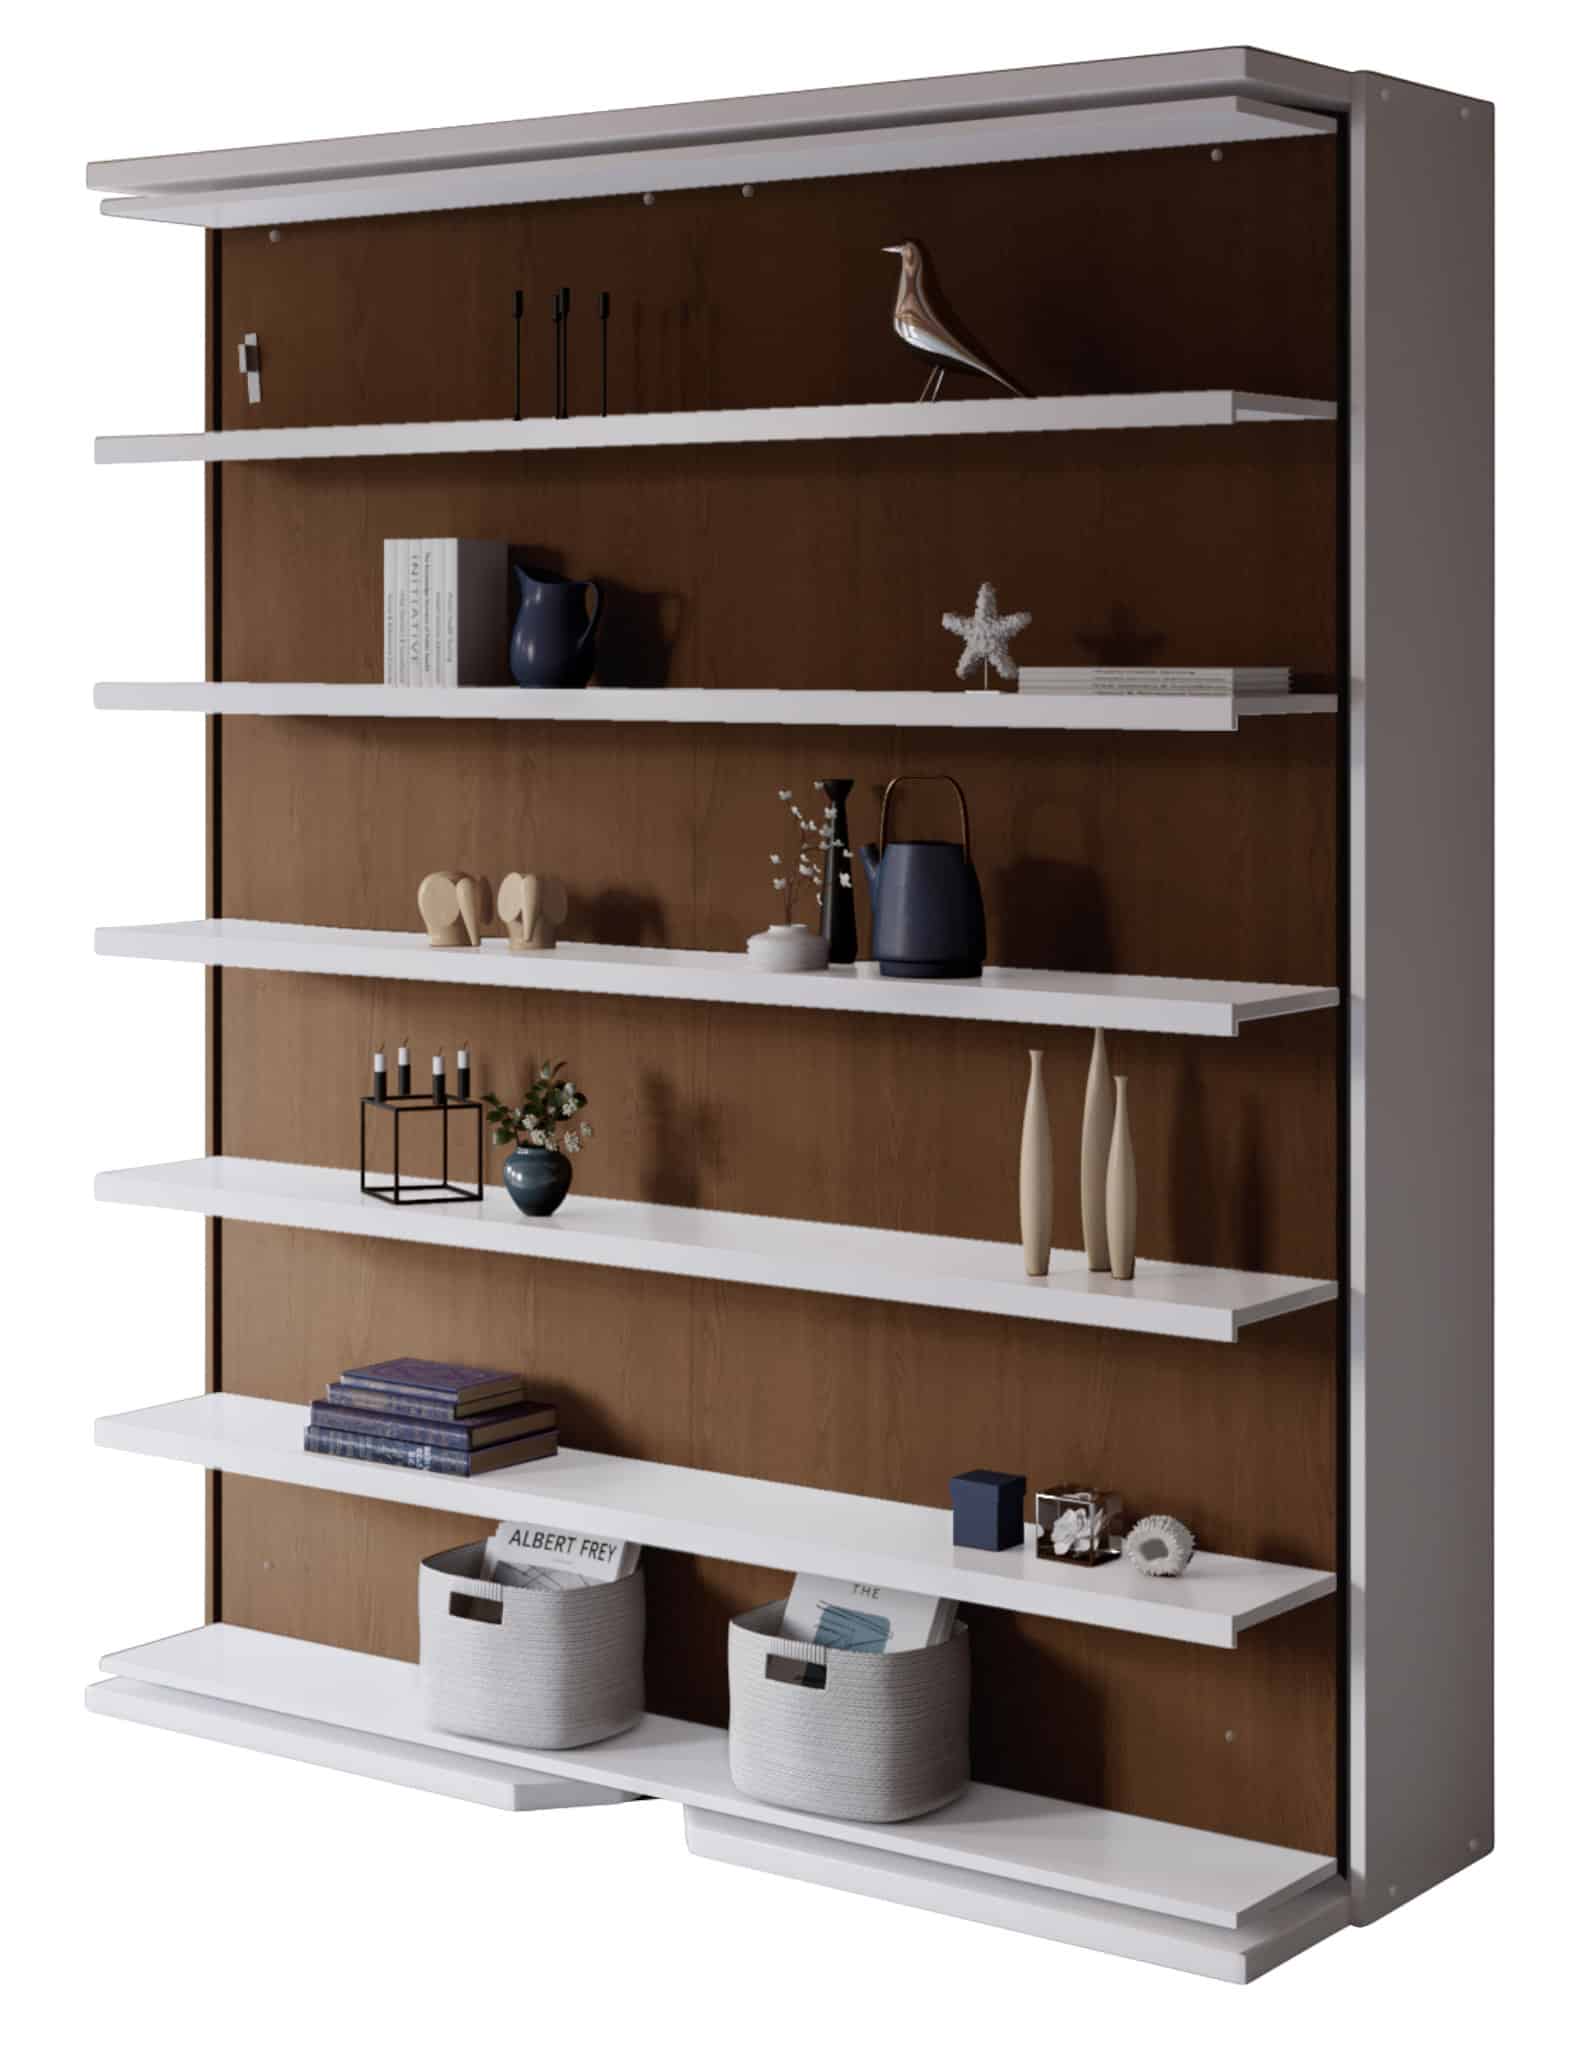 Revolving BookCase Italian Wall Bed | Expand Furniture